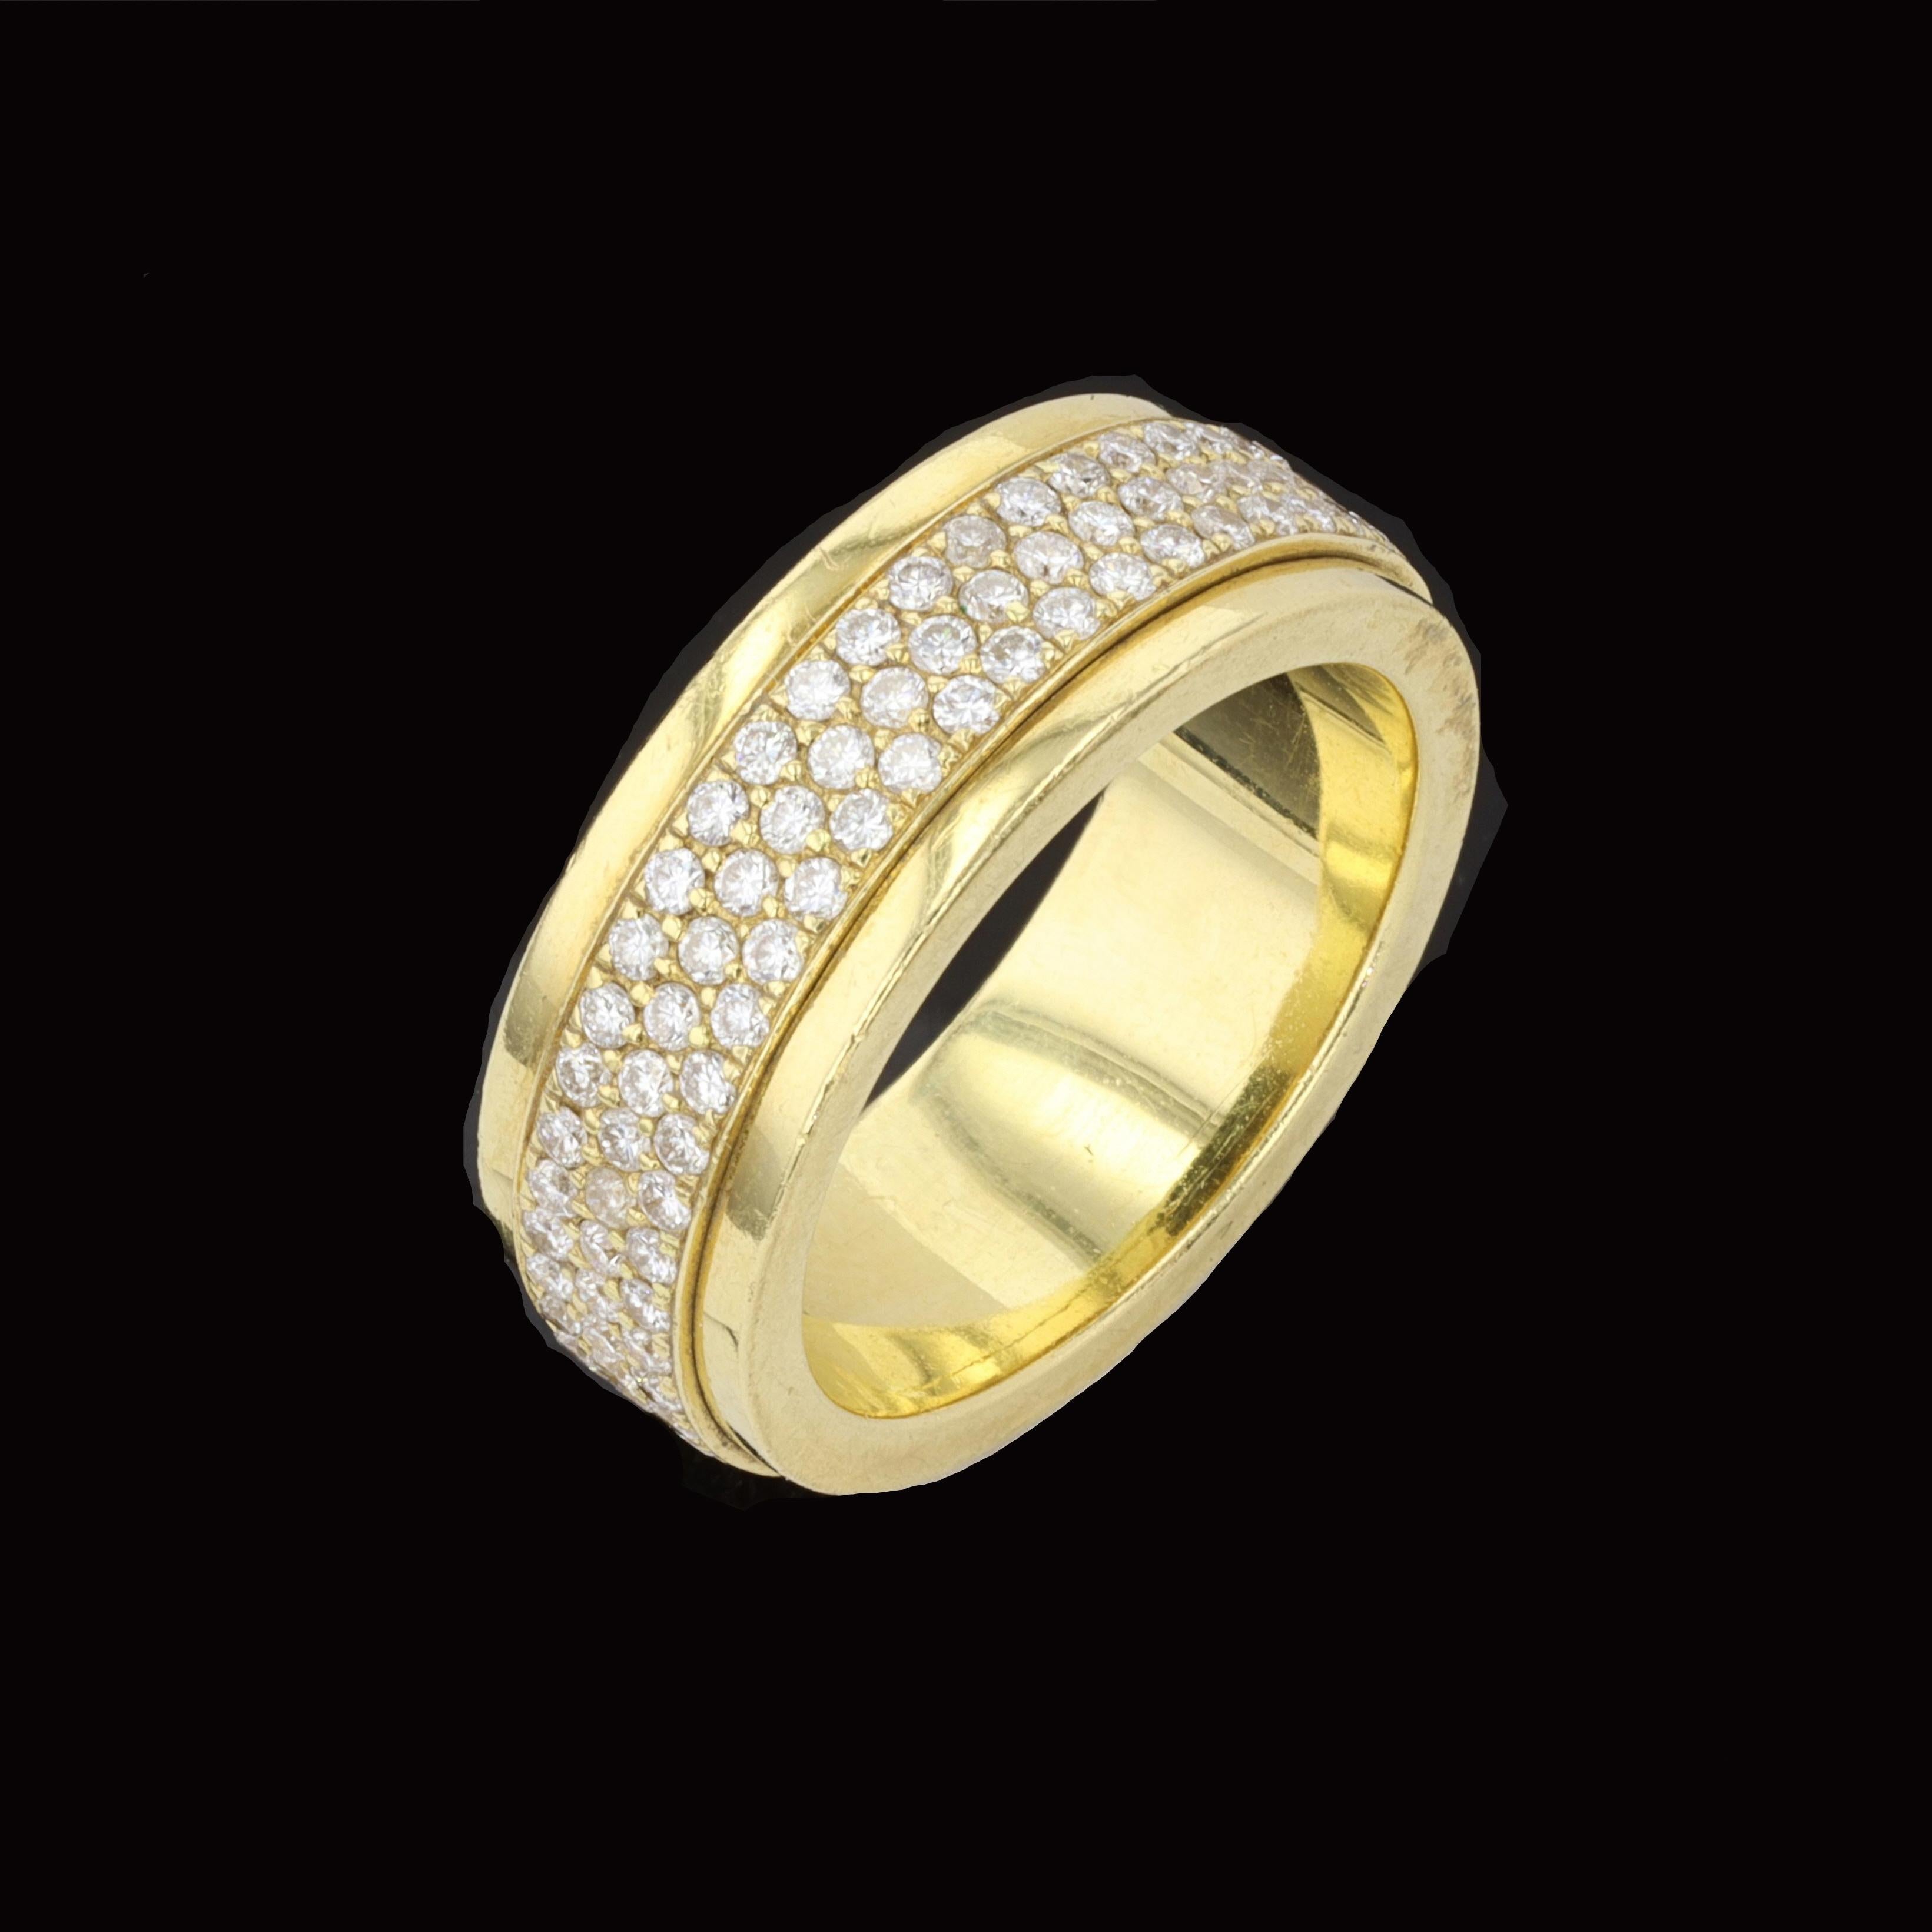 Three rows of glistening pave set round diamonds in 18K yellow gold give this estate ring an everlasting elegance. The ring is set with round cut diamonds that weigh approximately 1.50ct. The color of the diamonds is F with VS clarity. The ring